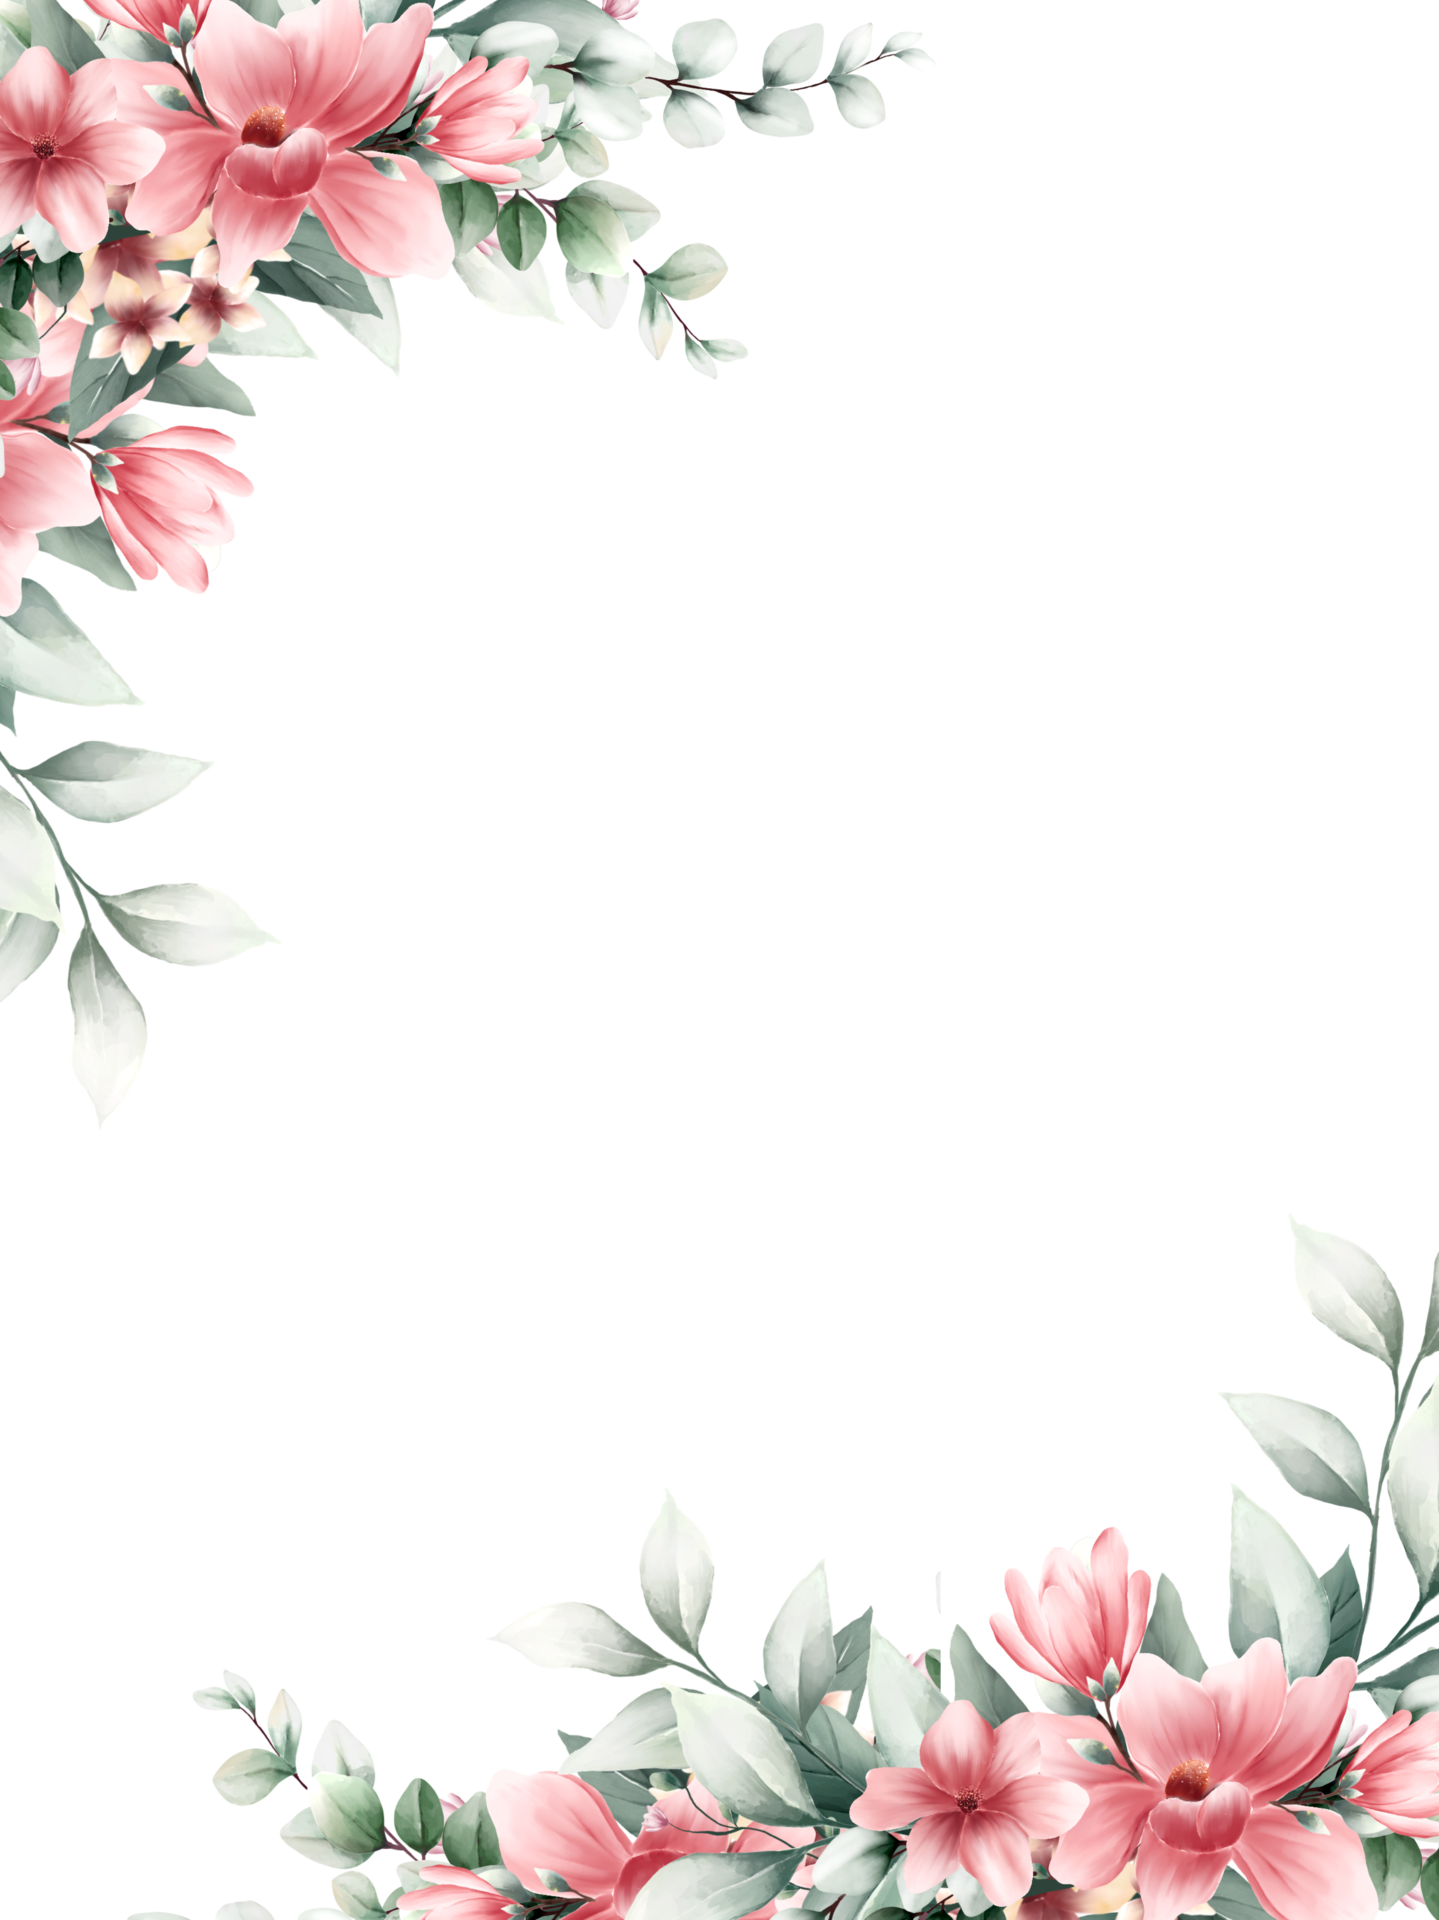 Floral Border PNGs for Free Download